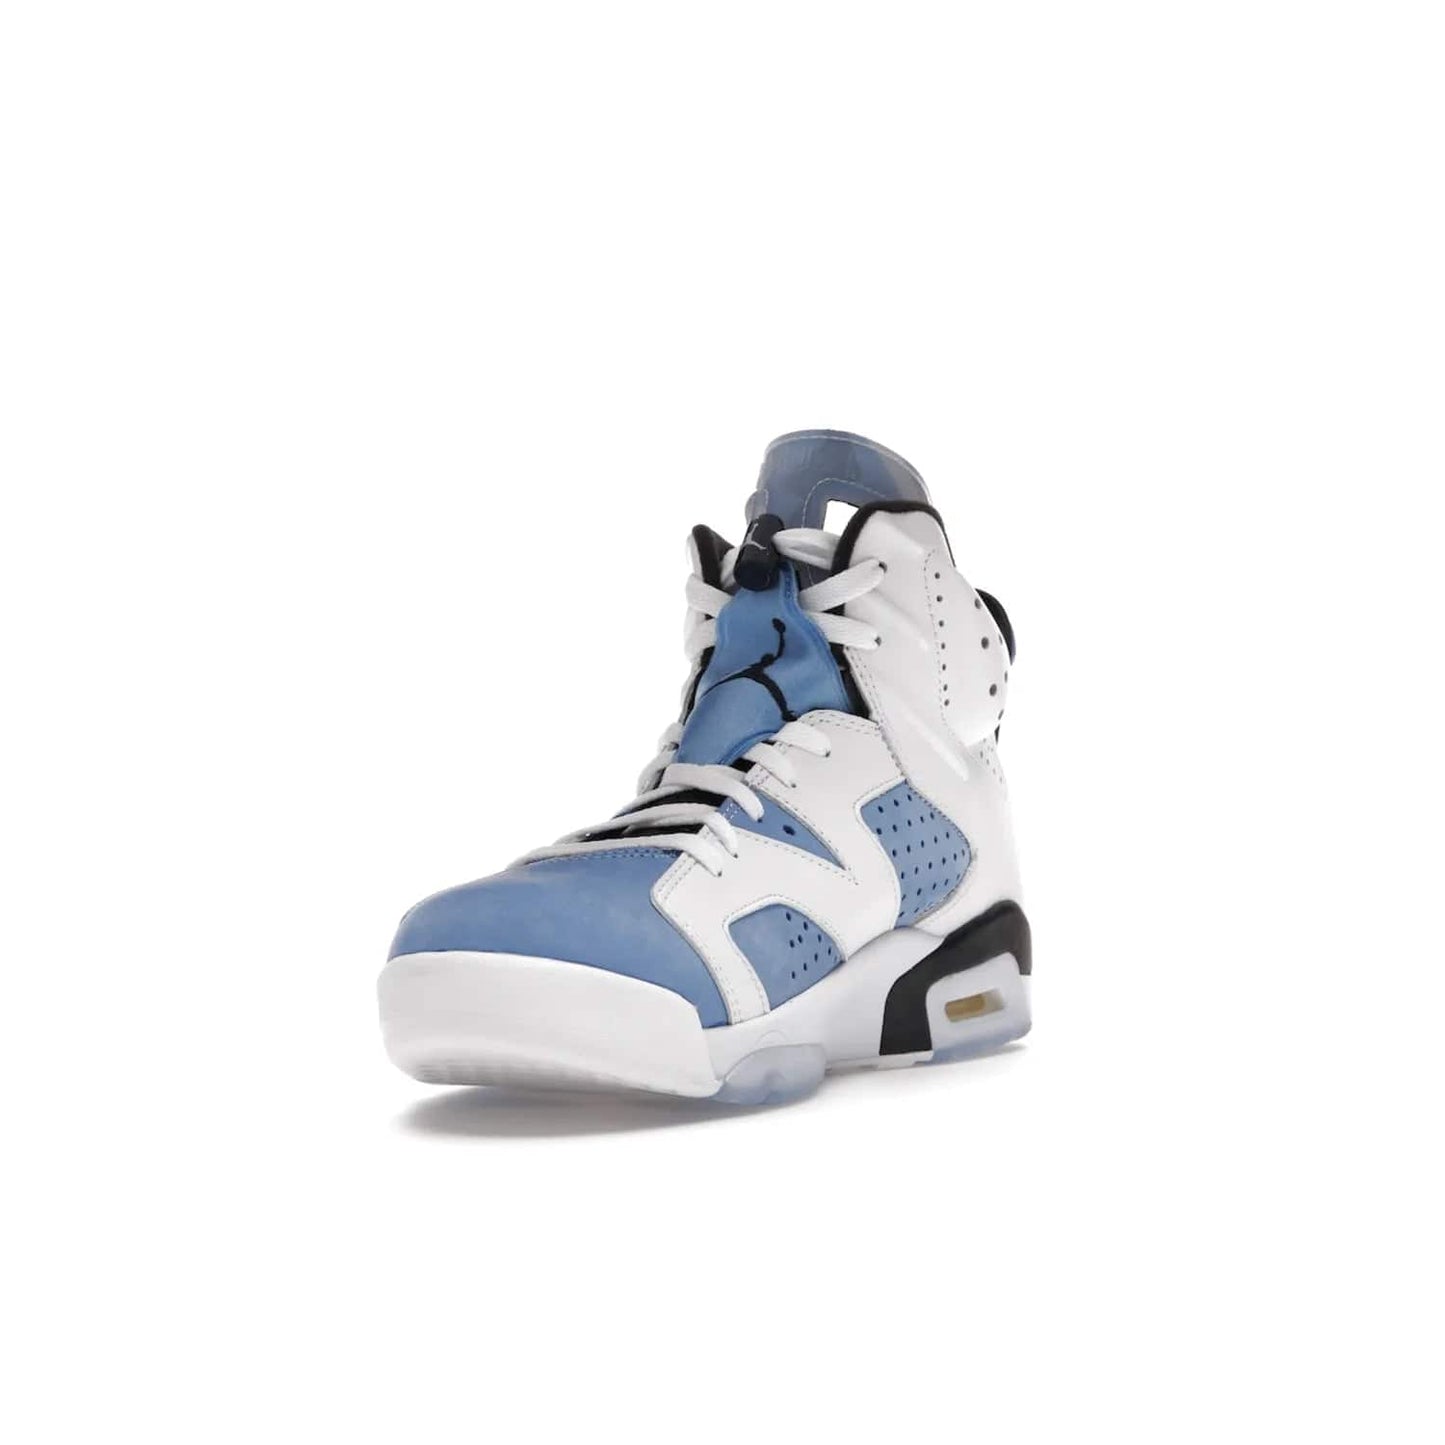 Jordan 6 Retro UNC White - Image 13 - Only at www.BallersClubKickz.com - Air Jordan 6 Retro UNC White with classic UNC colors brings nostalgia and style to a legendary silhouette. Celebrate MJ's alma mater with navy blue accents, icy semi-translucent sole and Jordan Team patch. Out March 2022 for the Sneaker Enthusiast.